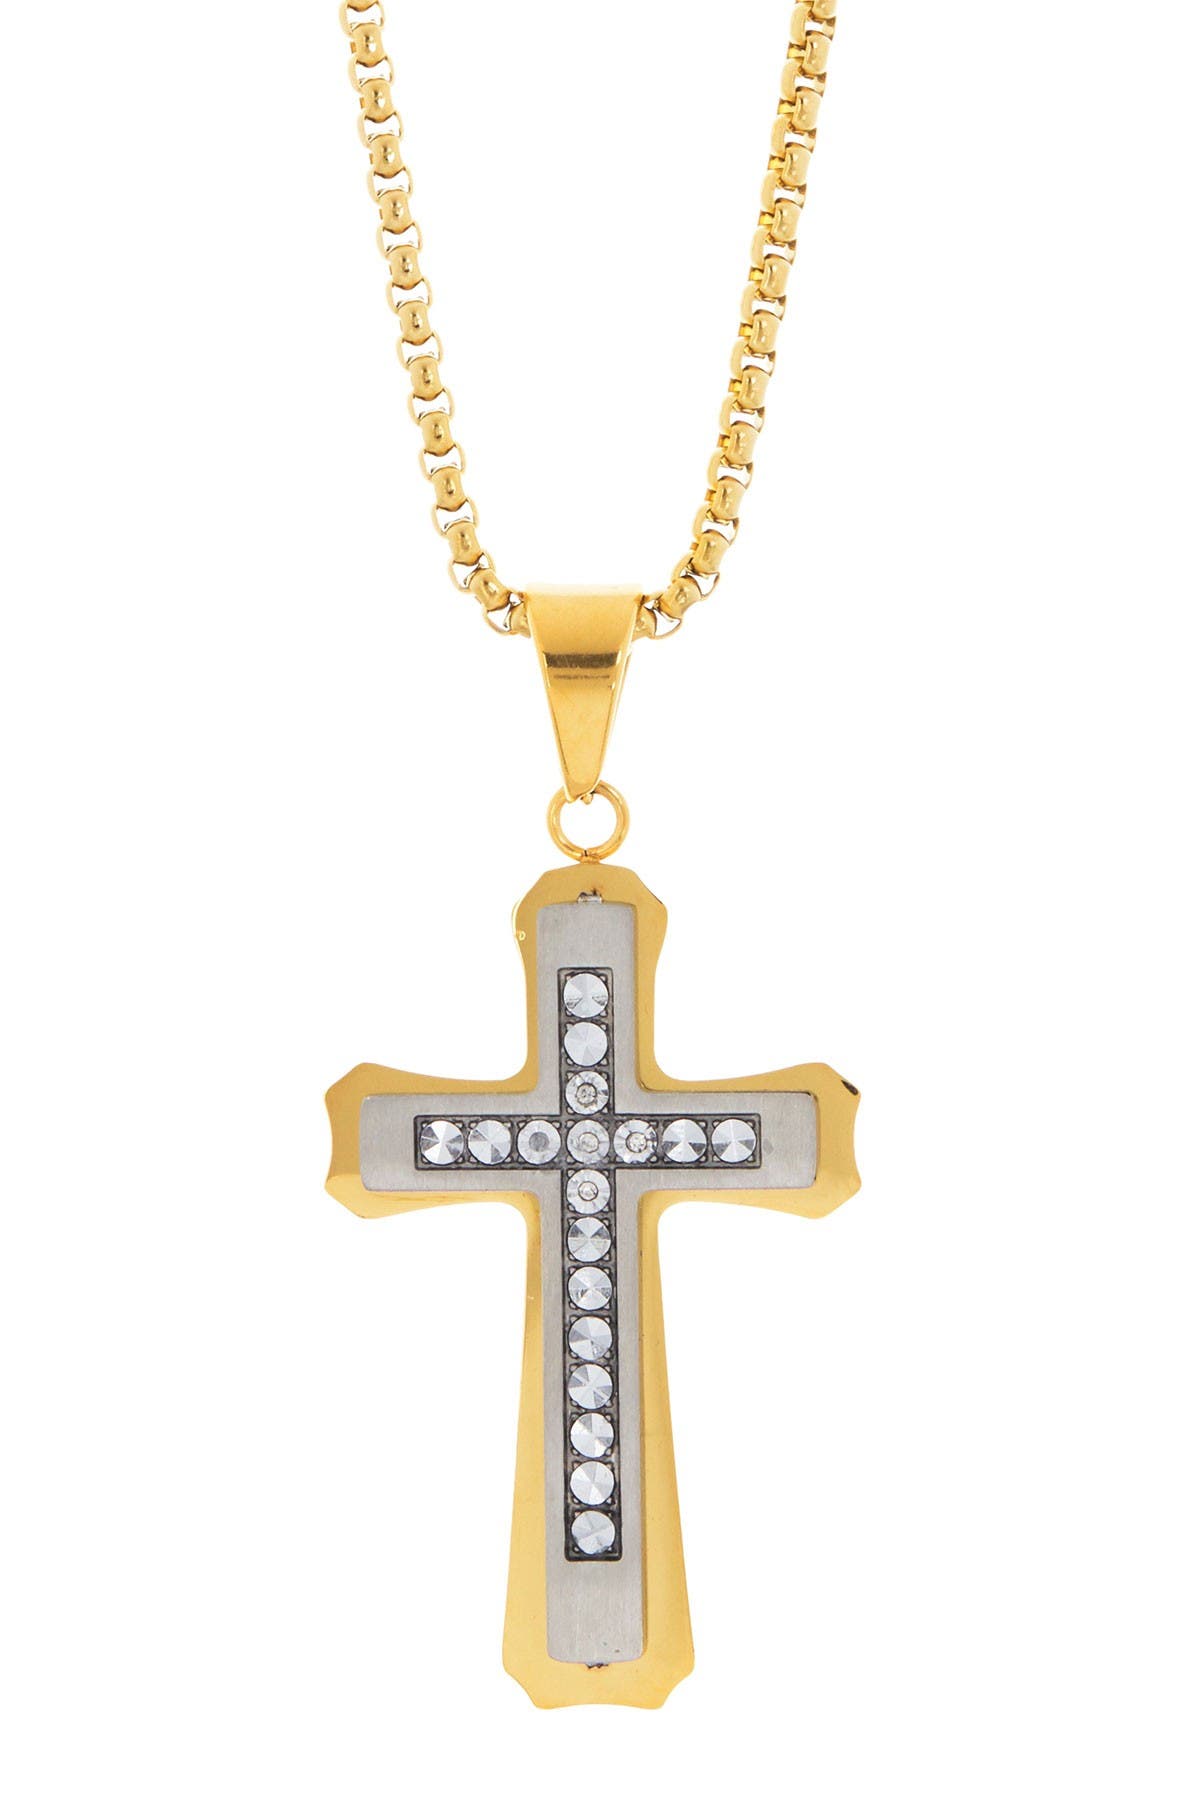 Details about   14K Two Tone Gold Brushed Cross Chain Slide Pendant MSRP $306